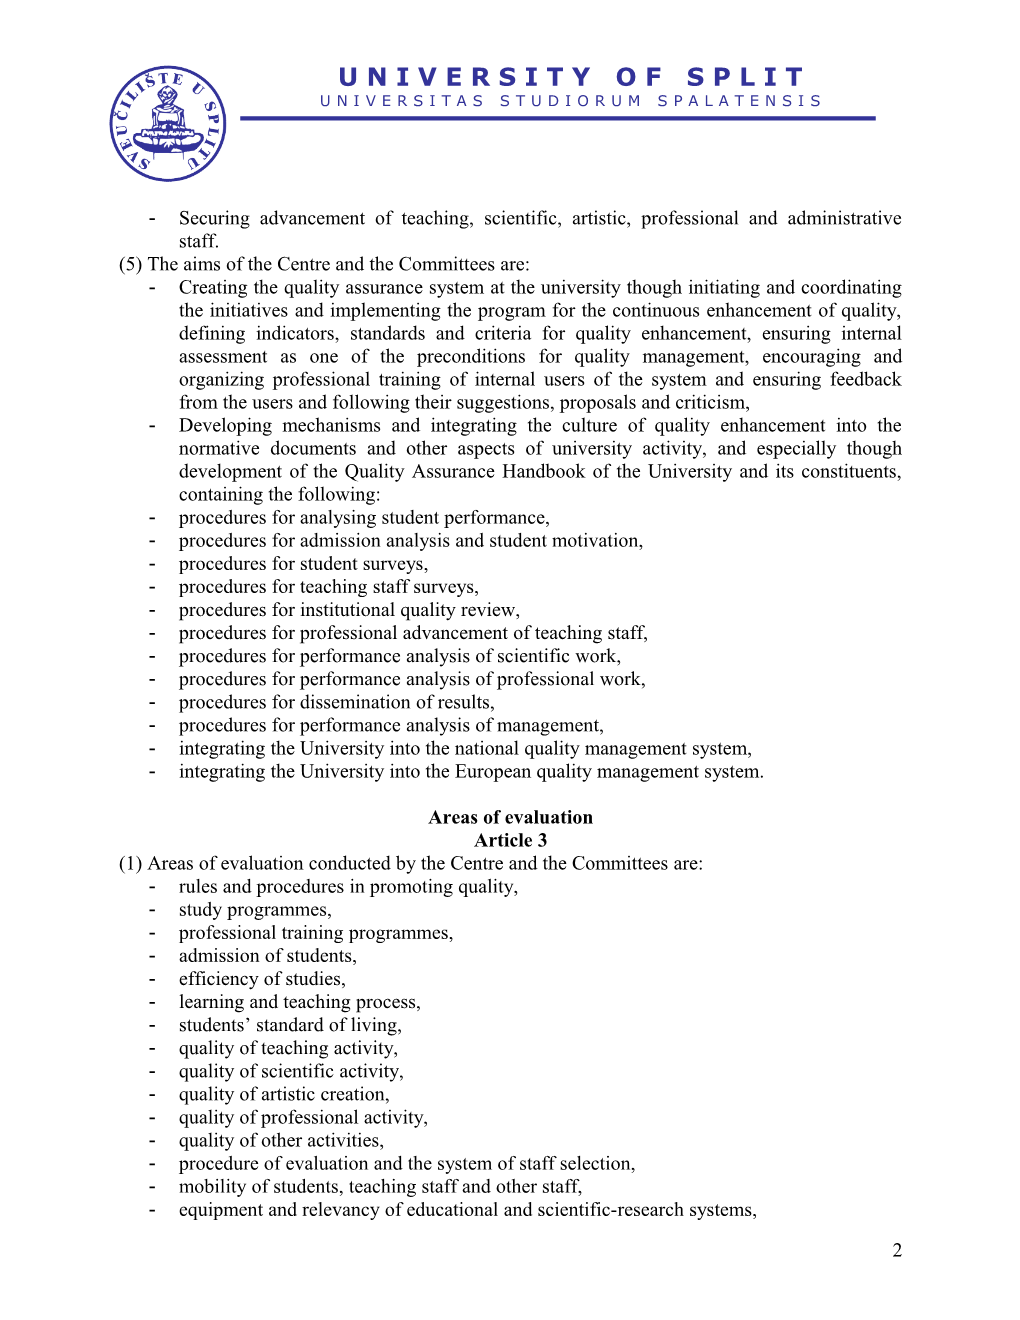 Regulations on Organisation and Role of the Quality Assurance Systemof the University of Split